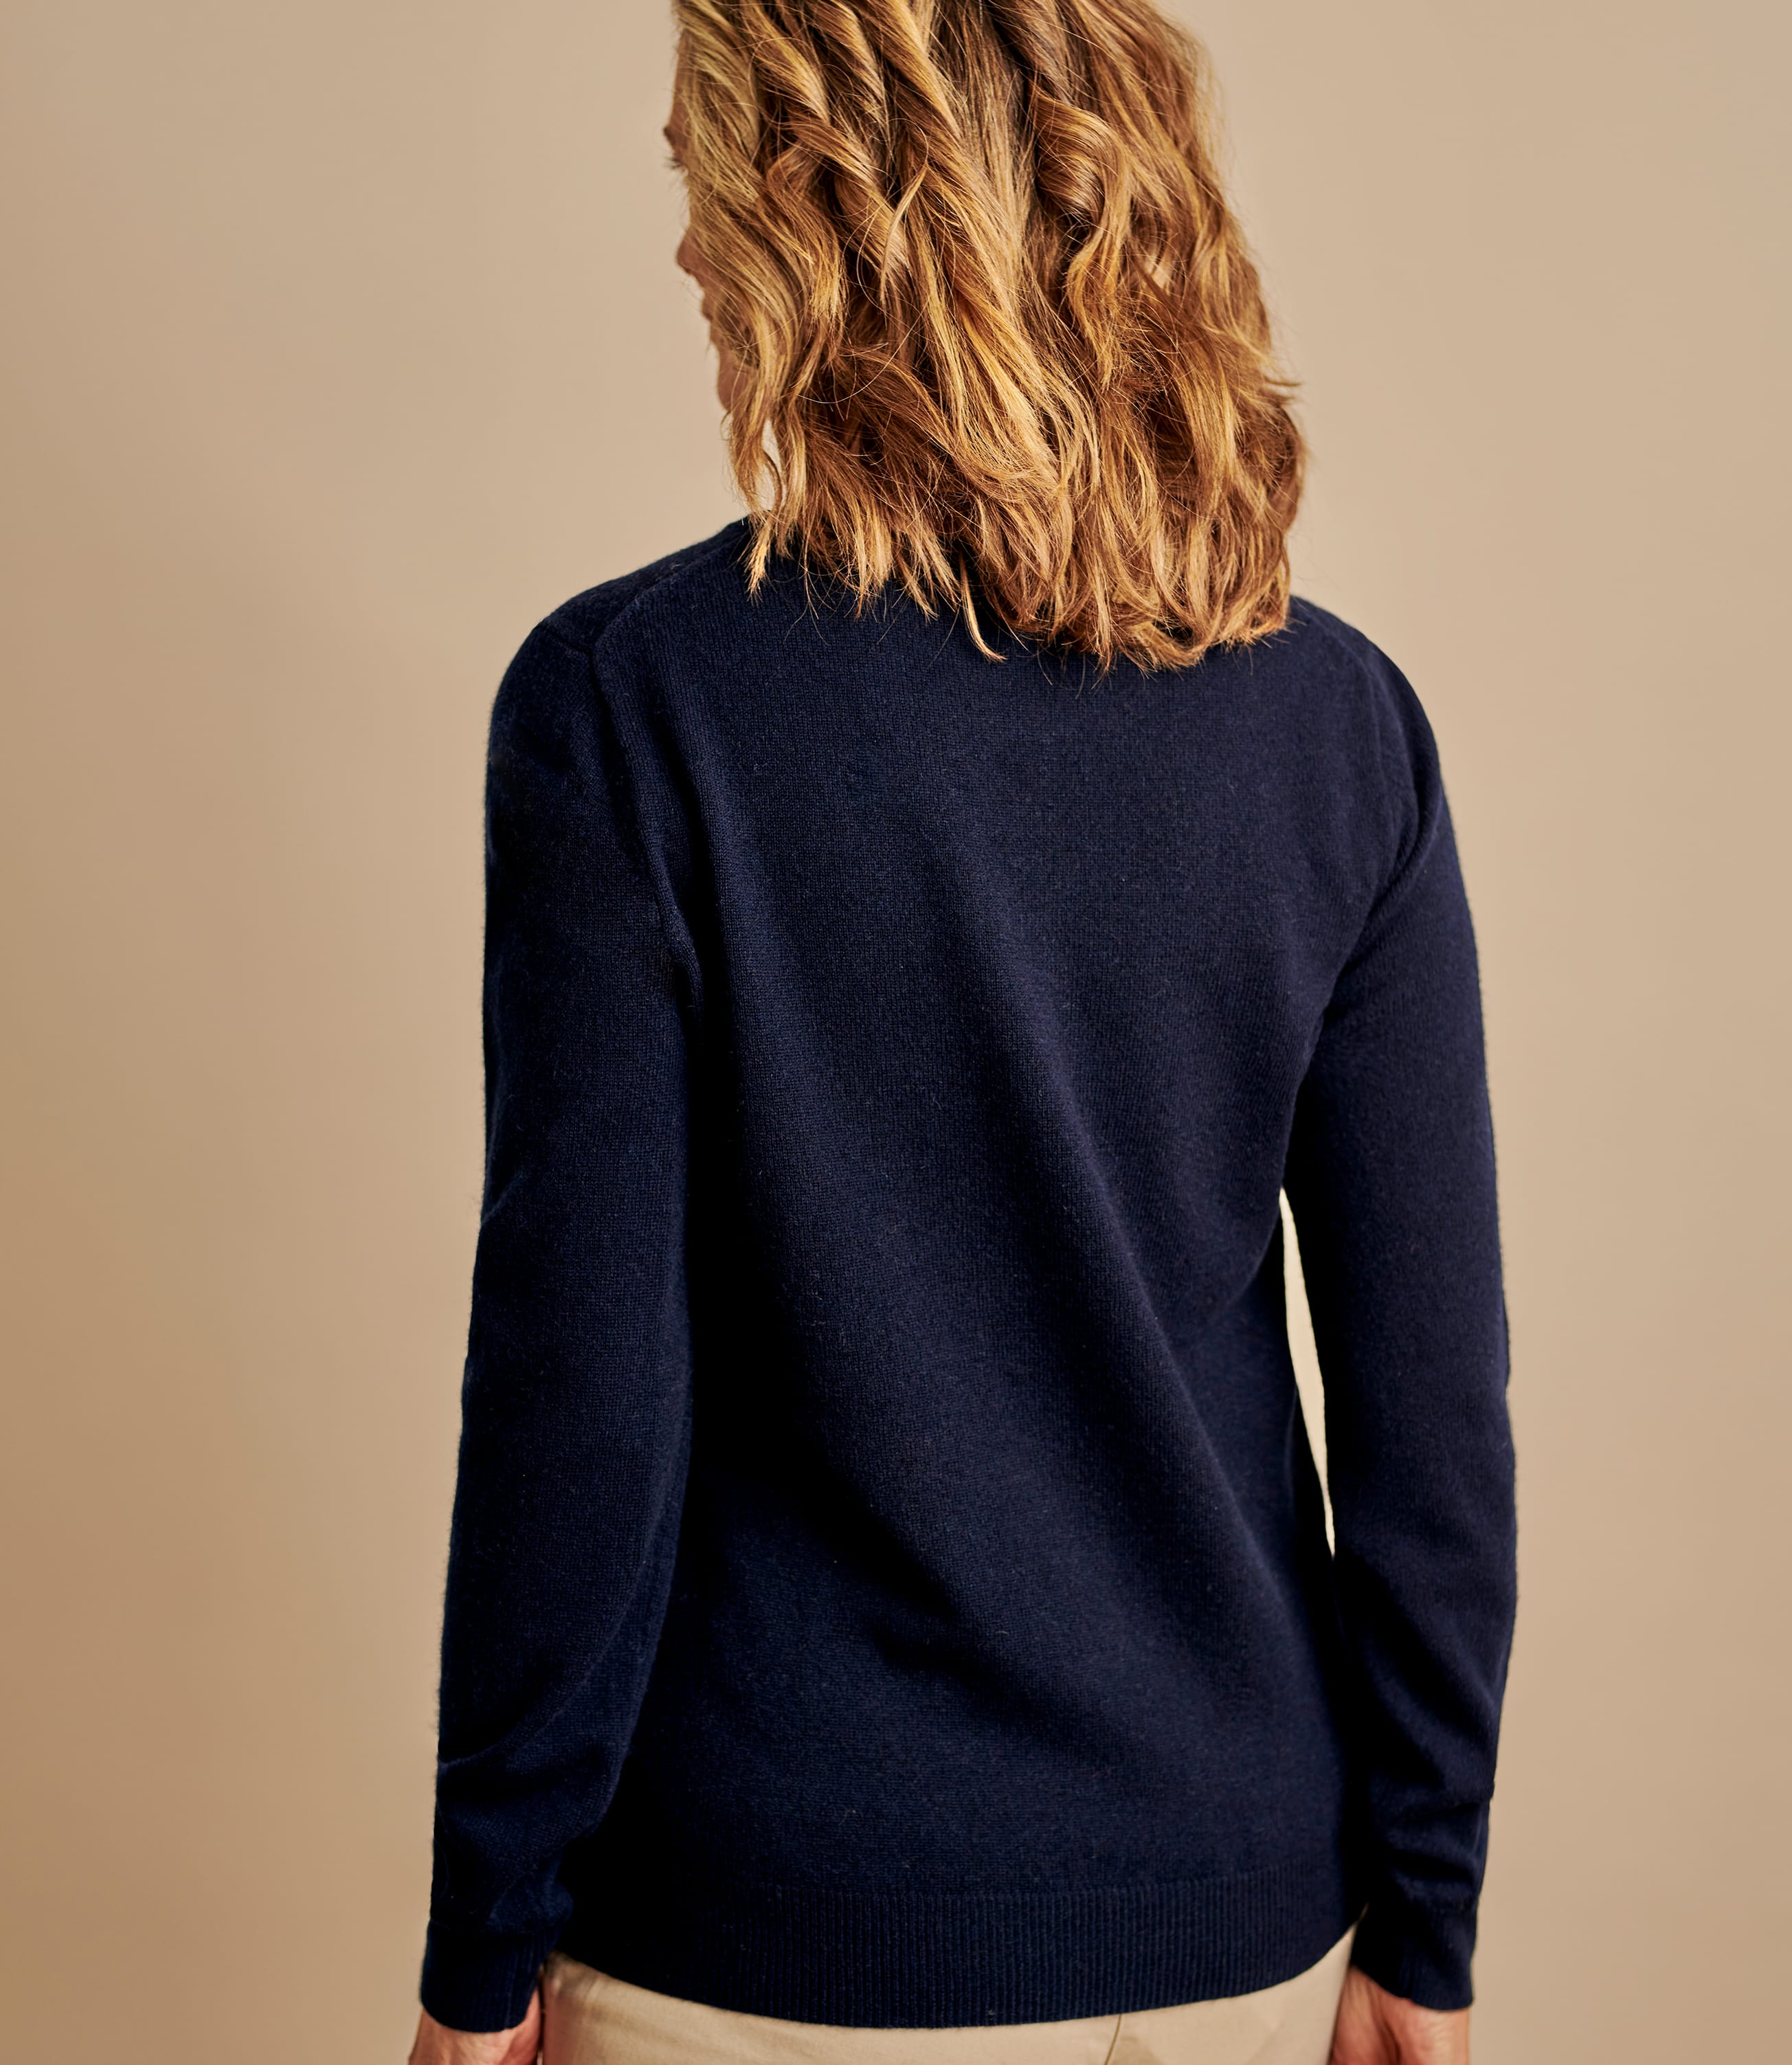 Navy | Cashmere & Merino Crew Neck Knitted Jumper | WoolOvers UK